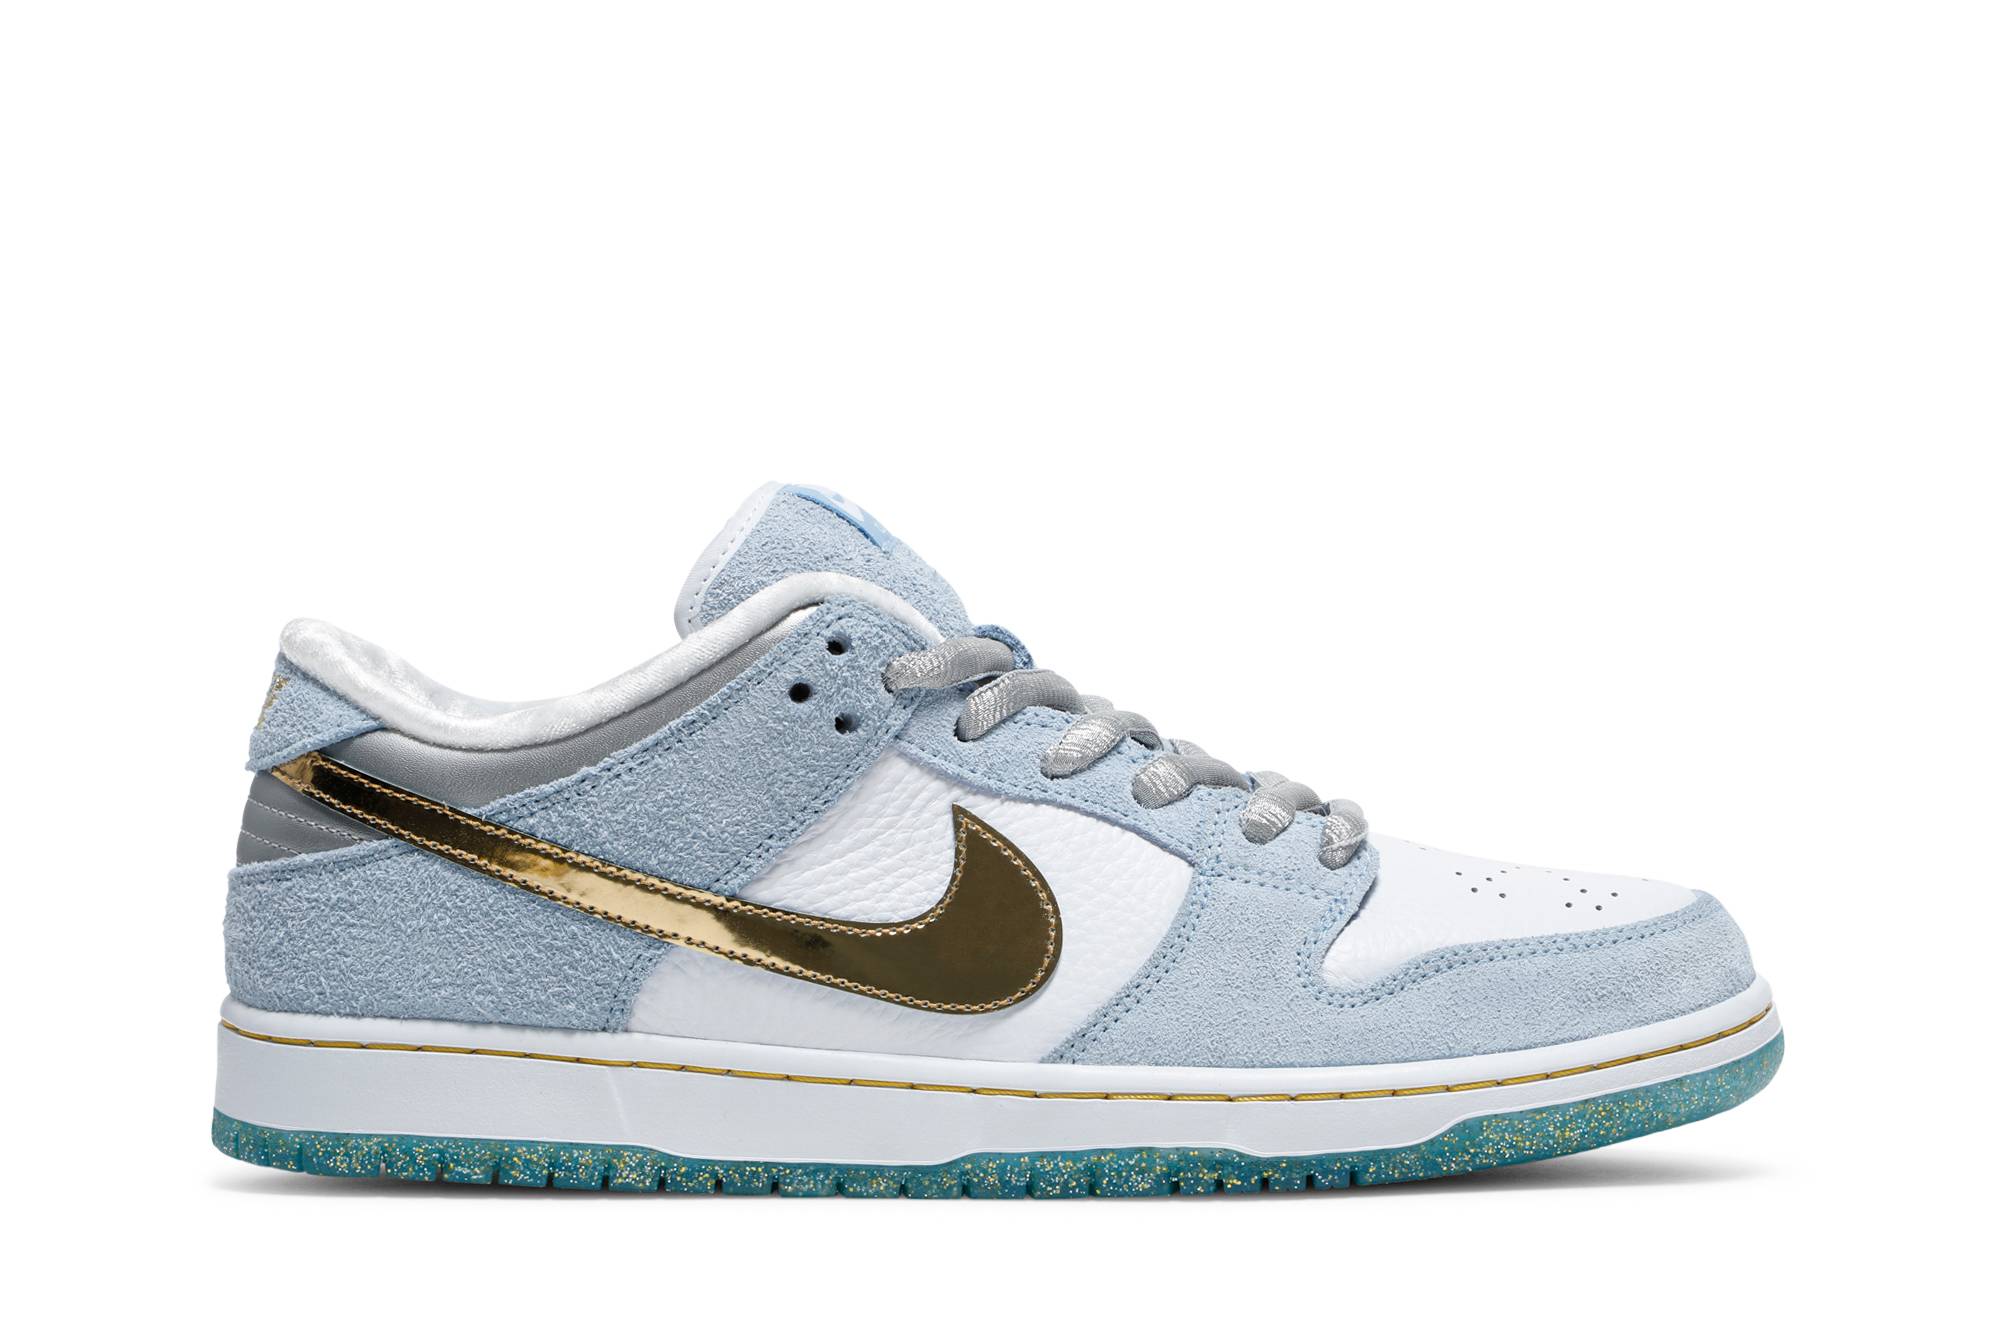 Sean Cliver x Nike SB Dunk Low 'Holiday Special' DC9936-100